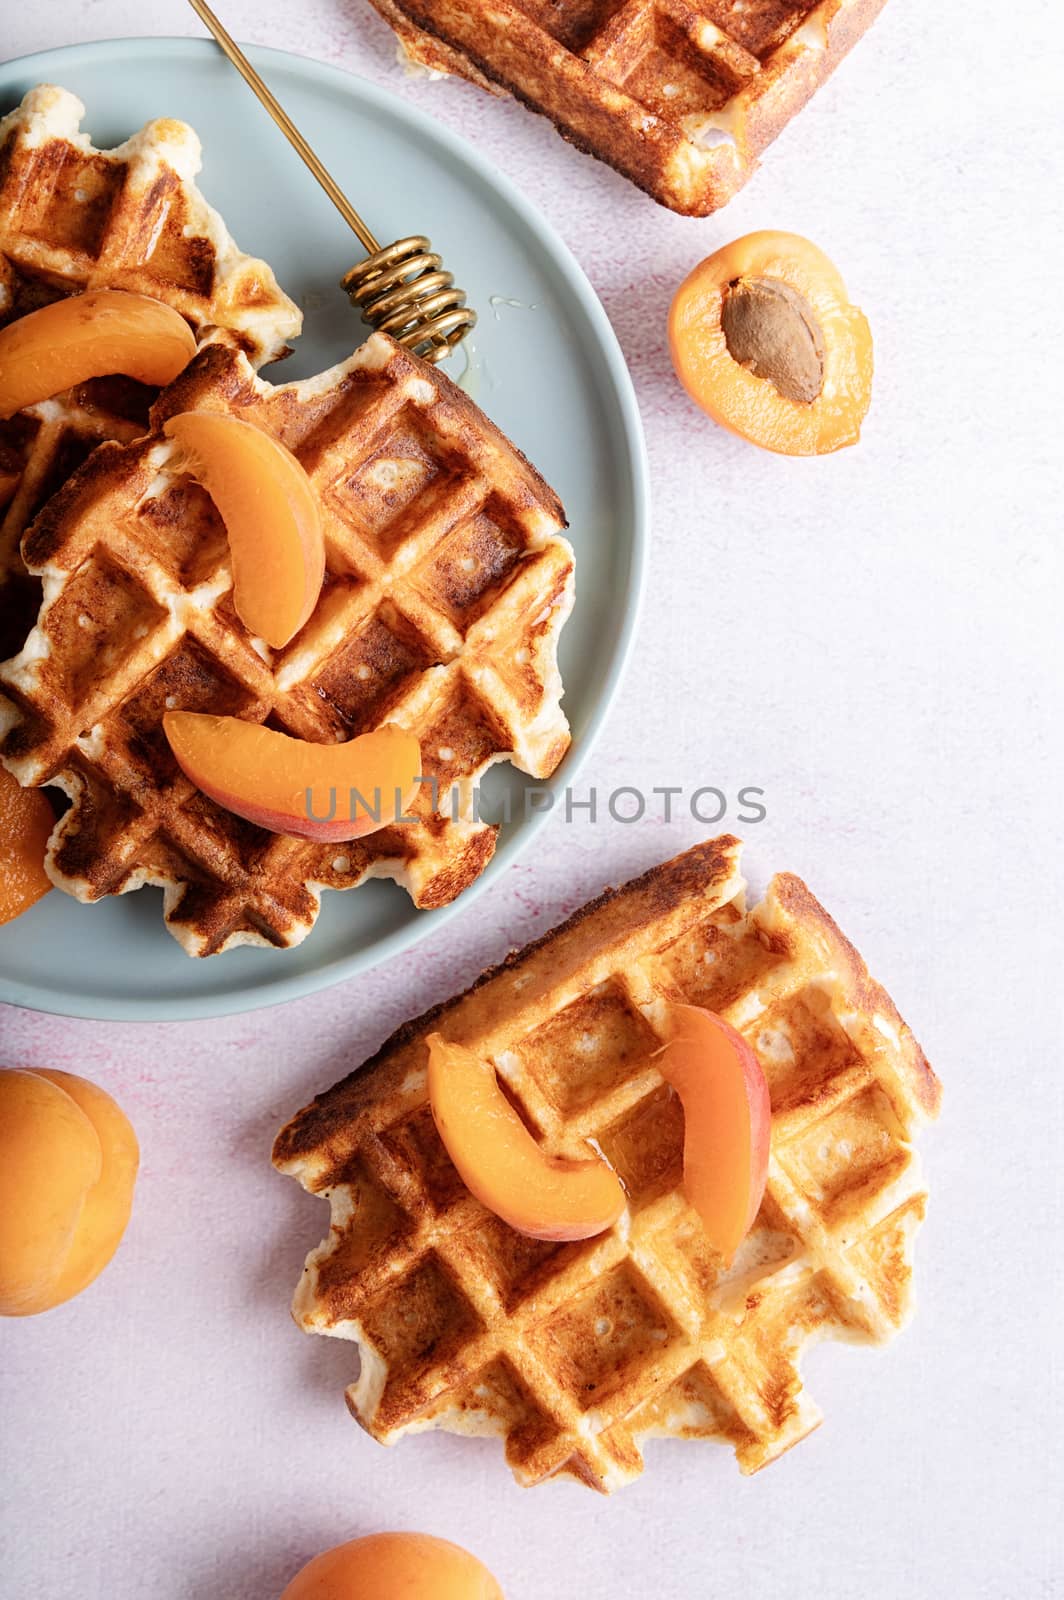 Homemade belgian waffles with apricots and honey on blue plate top view flat lay